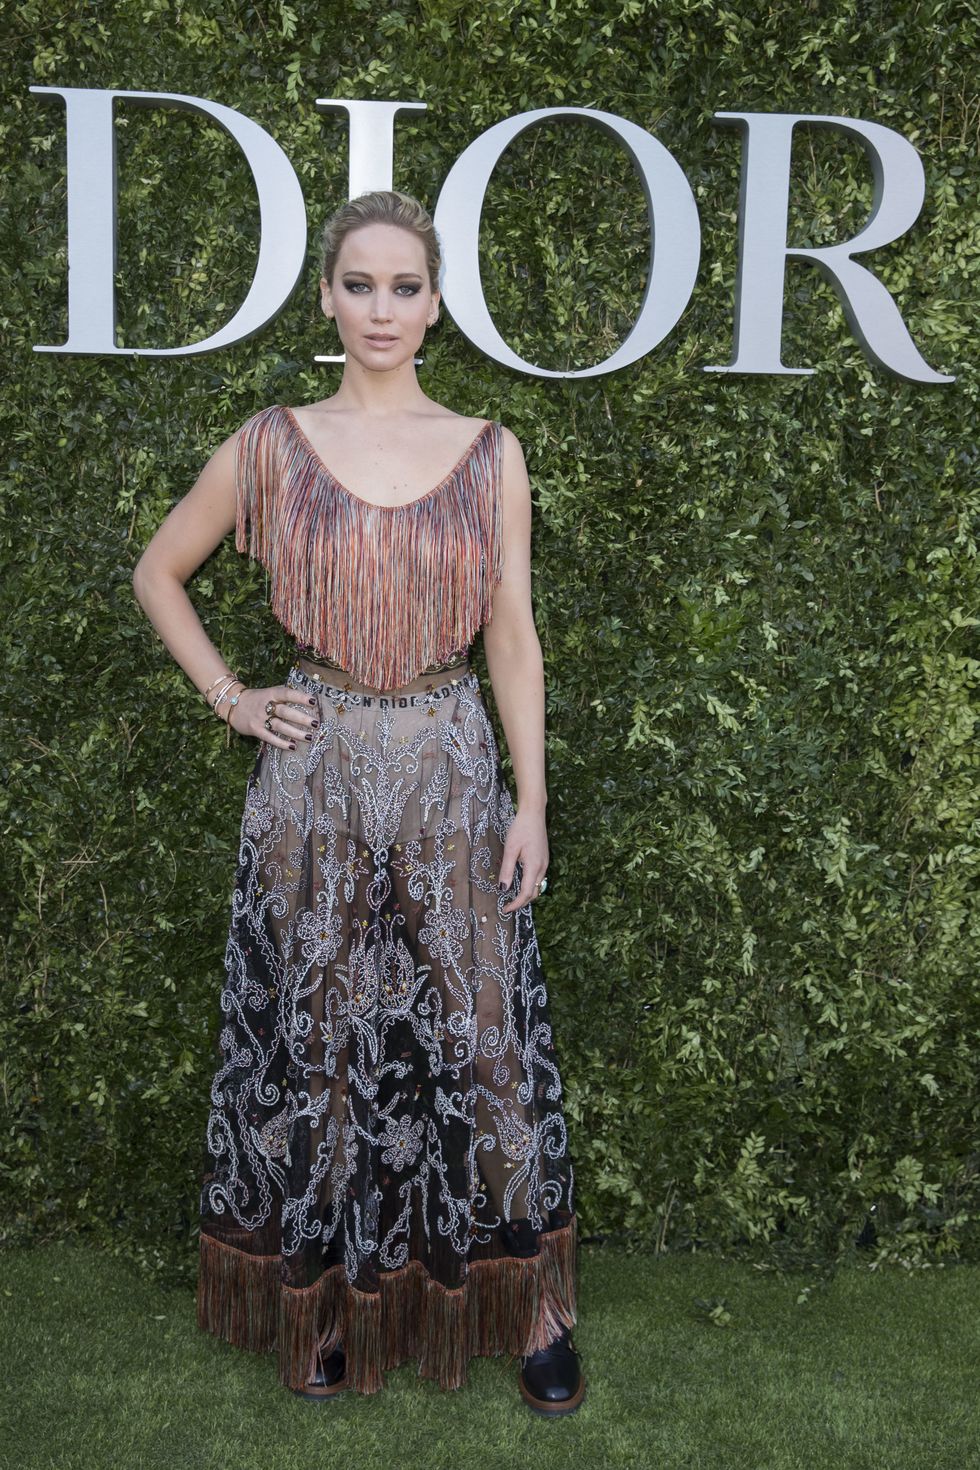 Actress Jennifer Lawrence at 'ChristianDior, couturier du reve' Exhibition Launch celebrating 70 years of creation in Paris, France, on July 3, 2017.